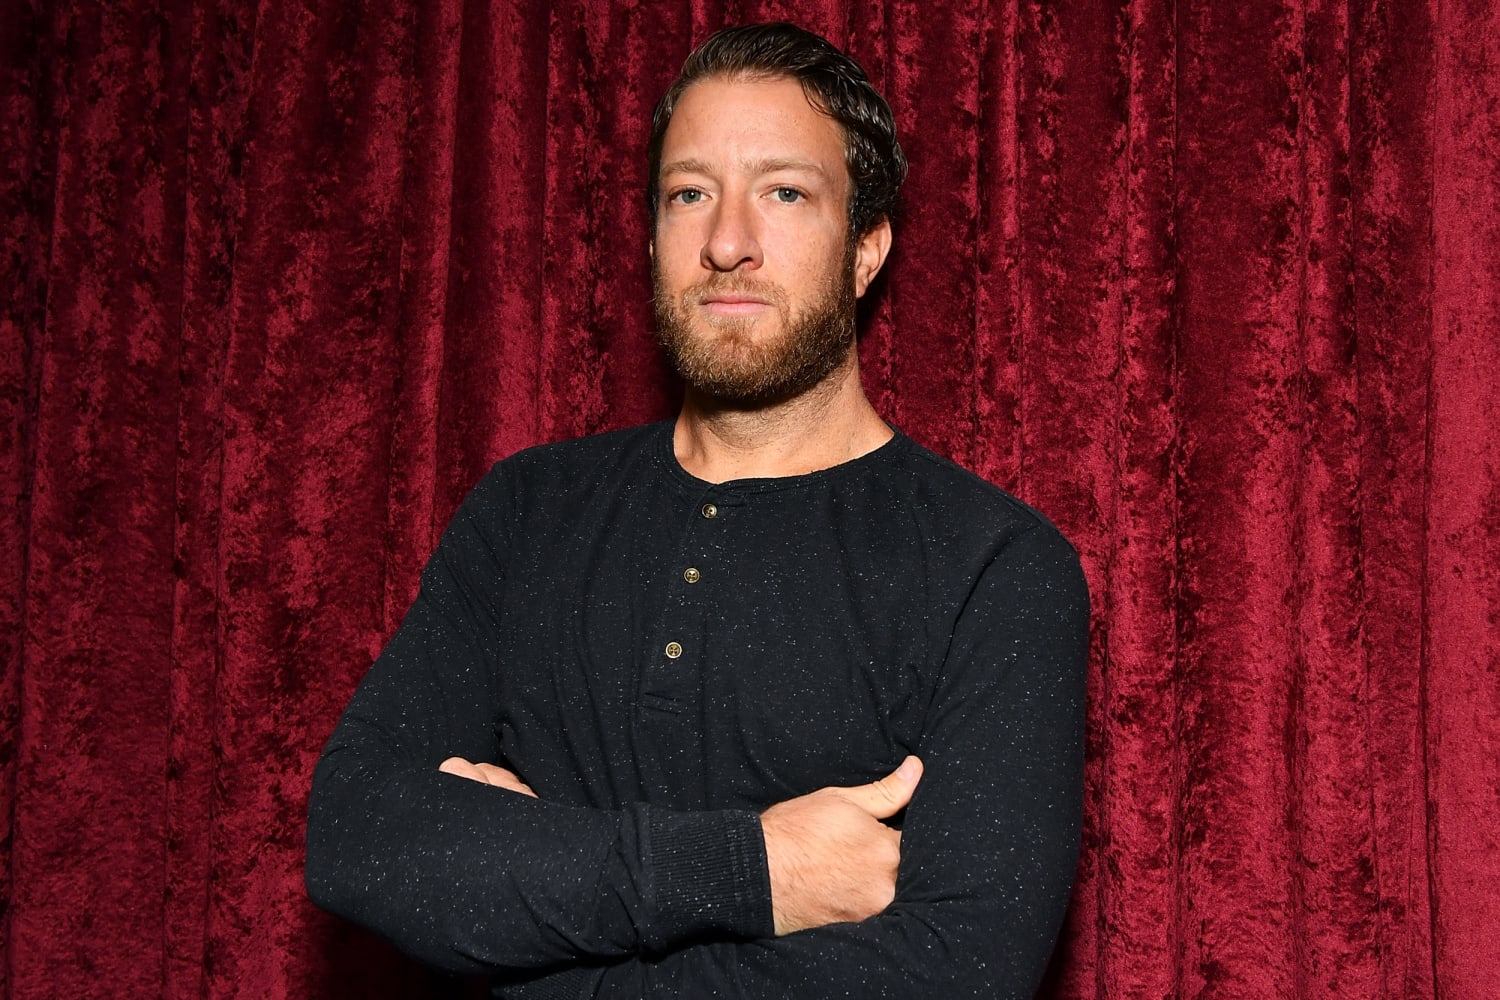 Barstool Sports’ Dave Portnoy denies ‘horrific’ sexual misconduct allegations